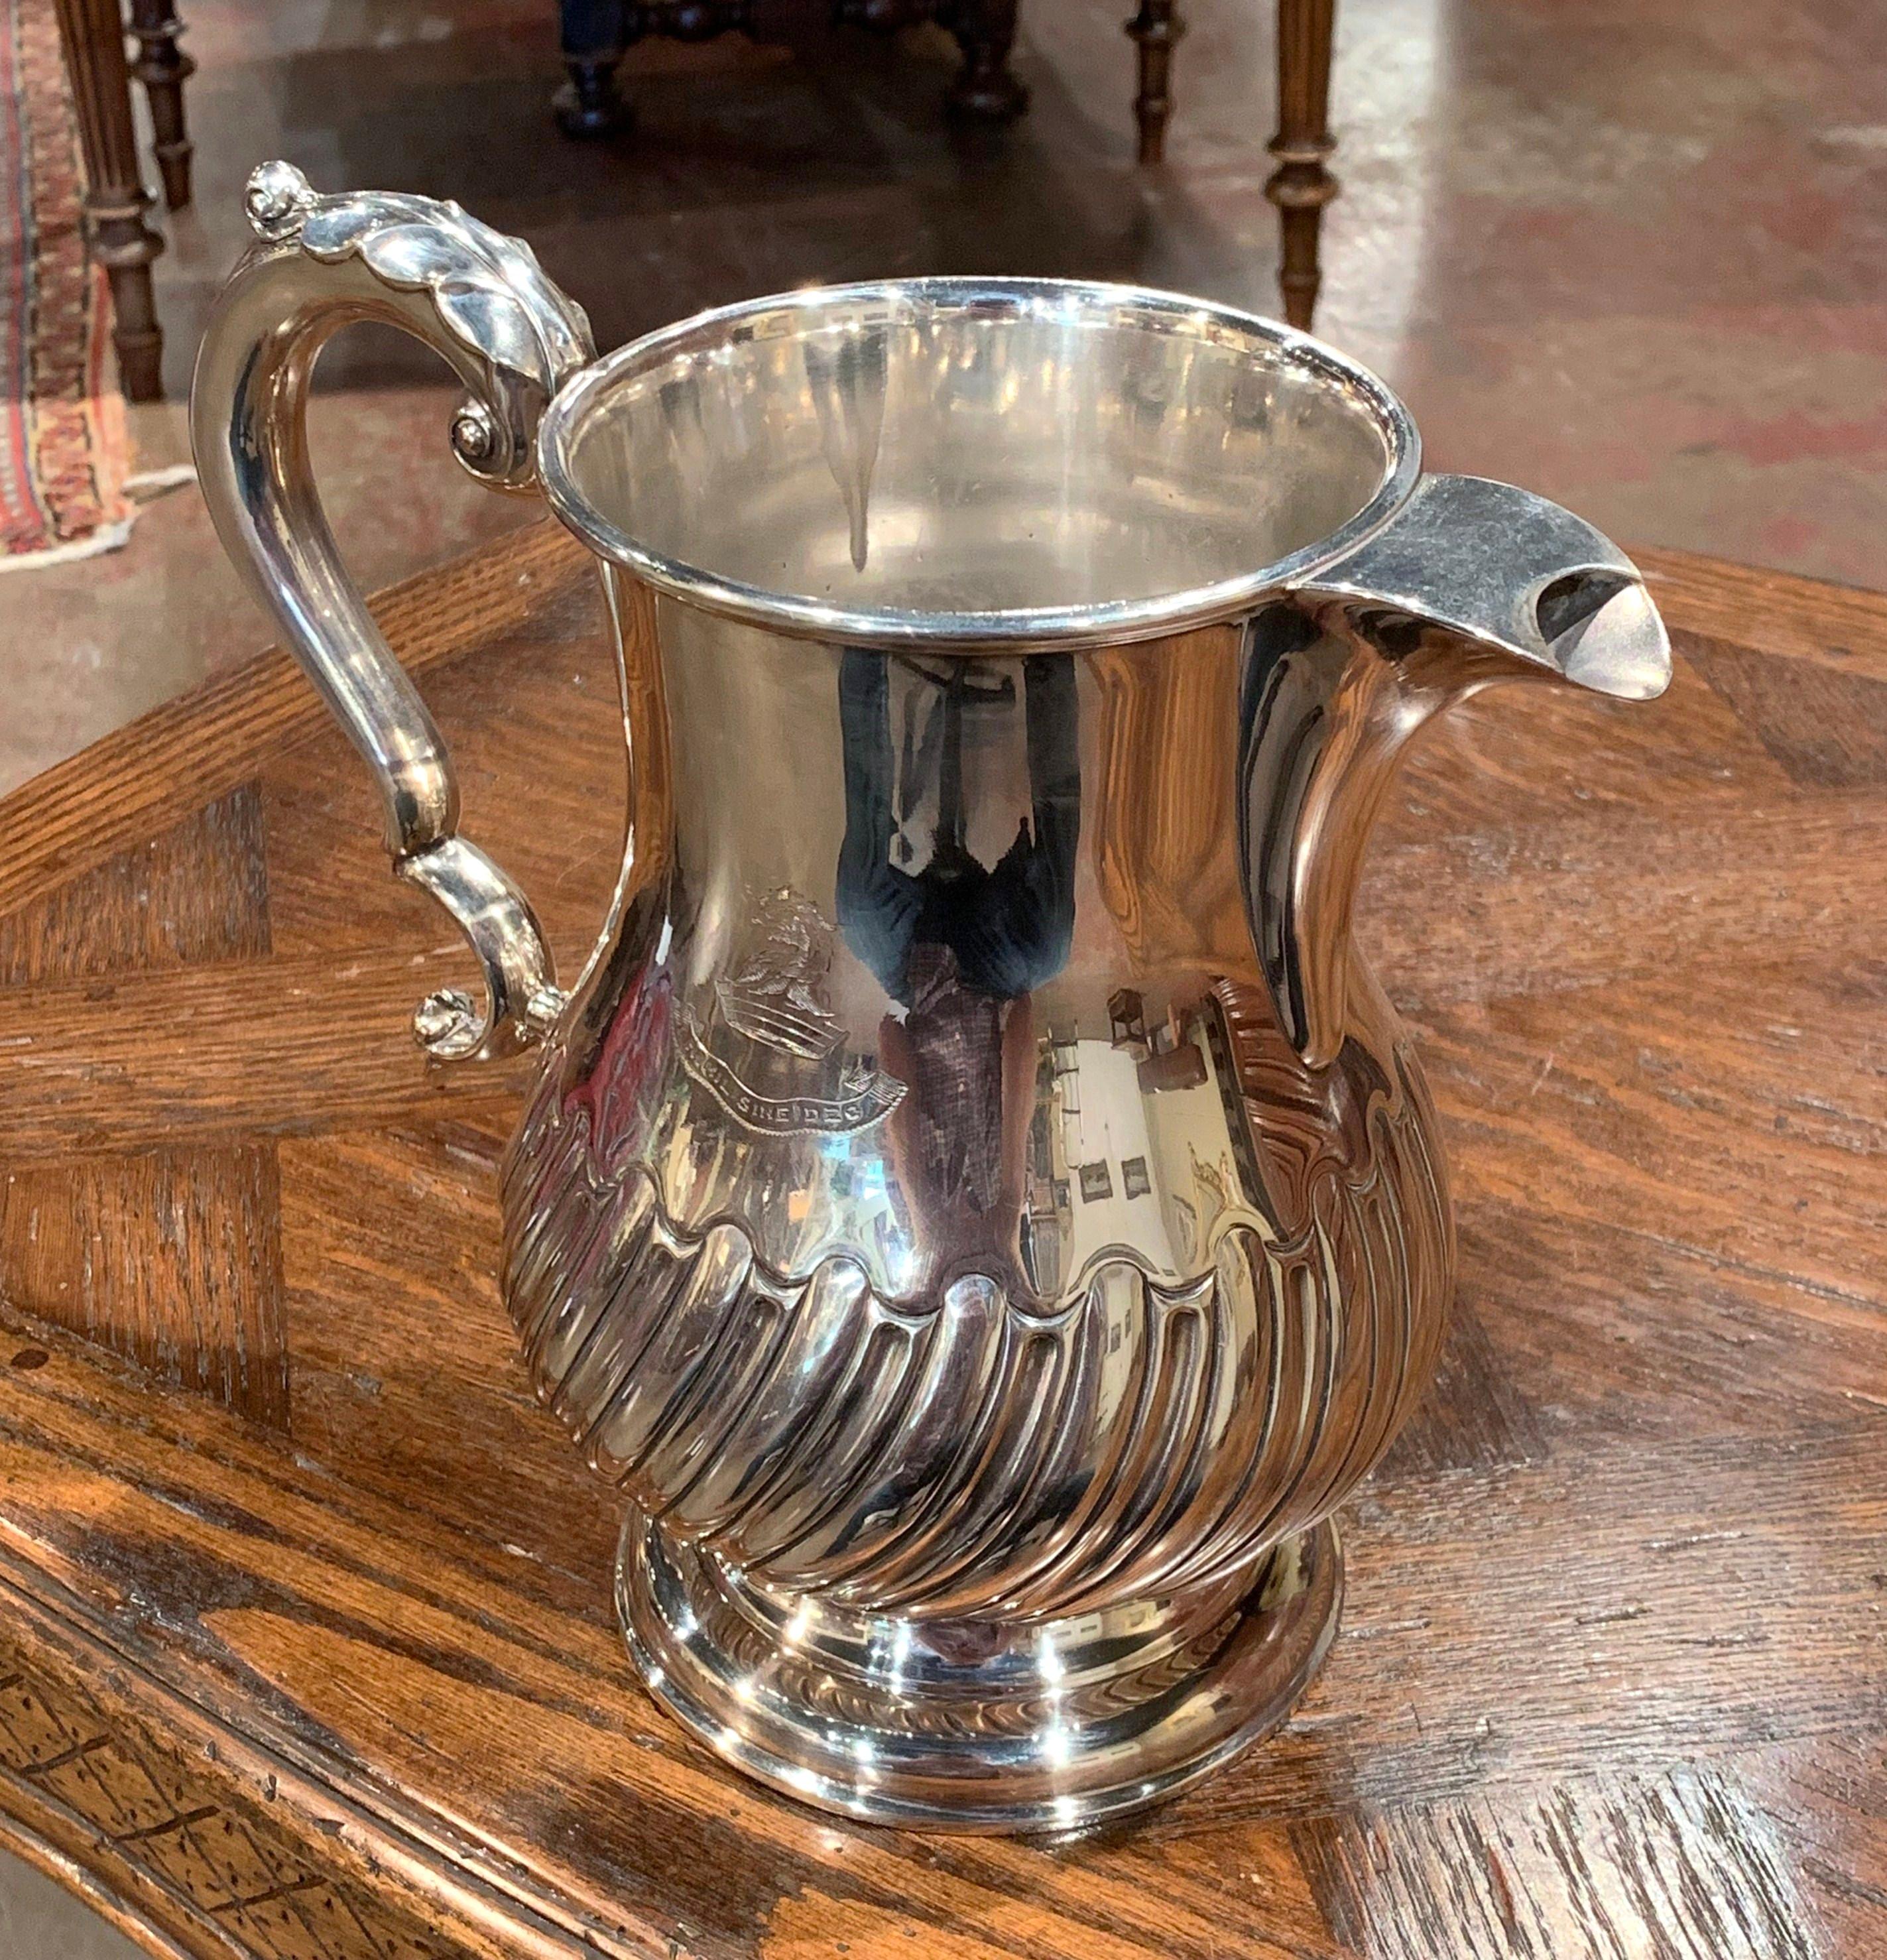 Decorate a wet bar with this elegant, antique silver plated pitcher. Crafted in England circa 1920, the traditional, timeless water jug sits on a raised rounded base. The pitcher has a baluster form and a downward sweeping ribbing on the lower half